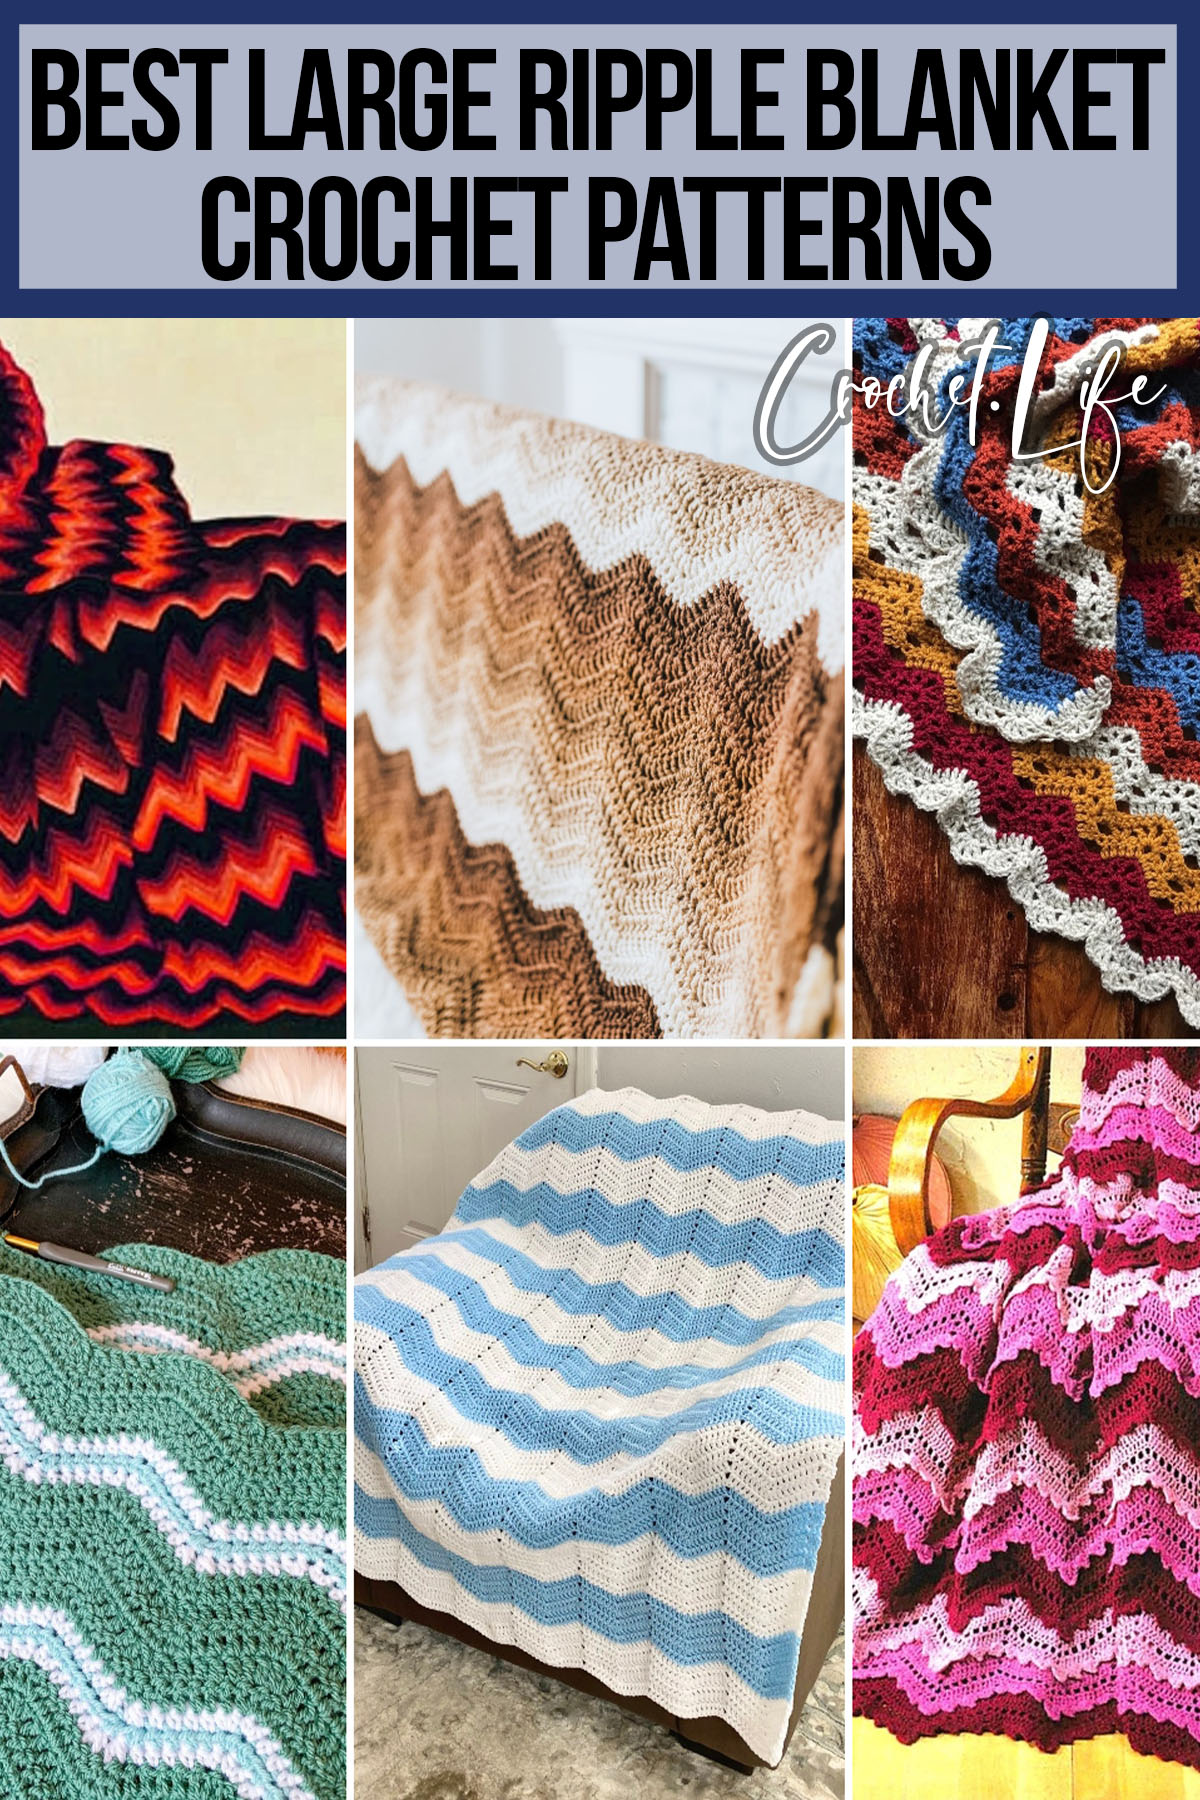 photo collage of large ripple crochet blanket patterns with text which reads best large ripple blanket crochet patterns